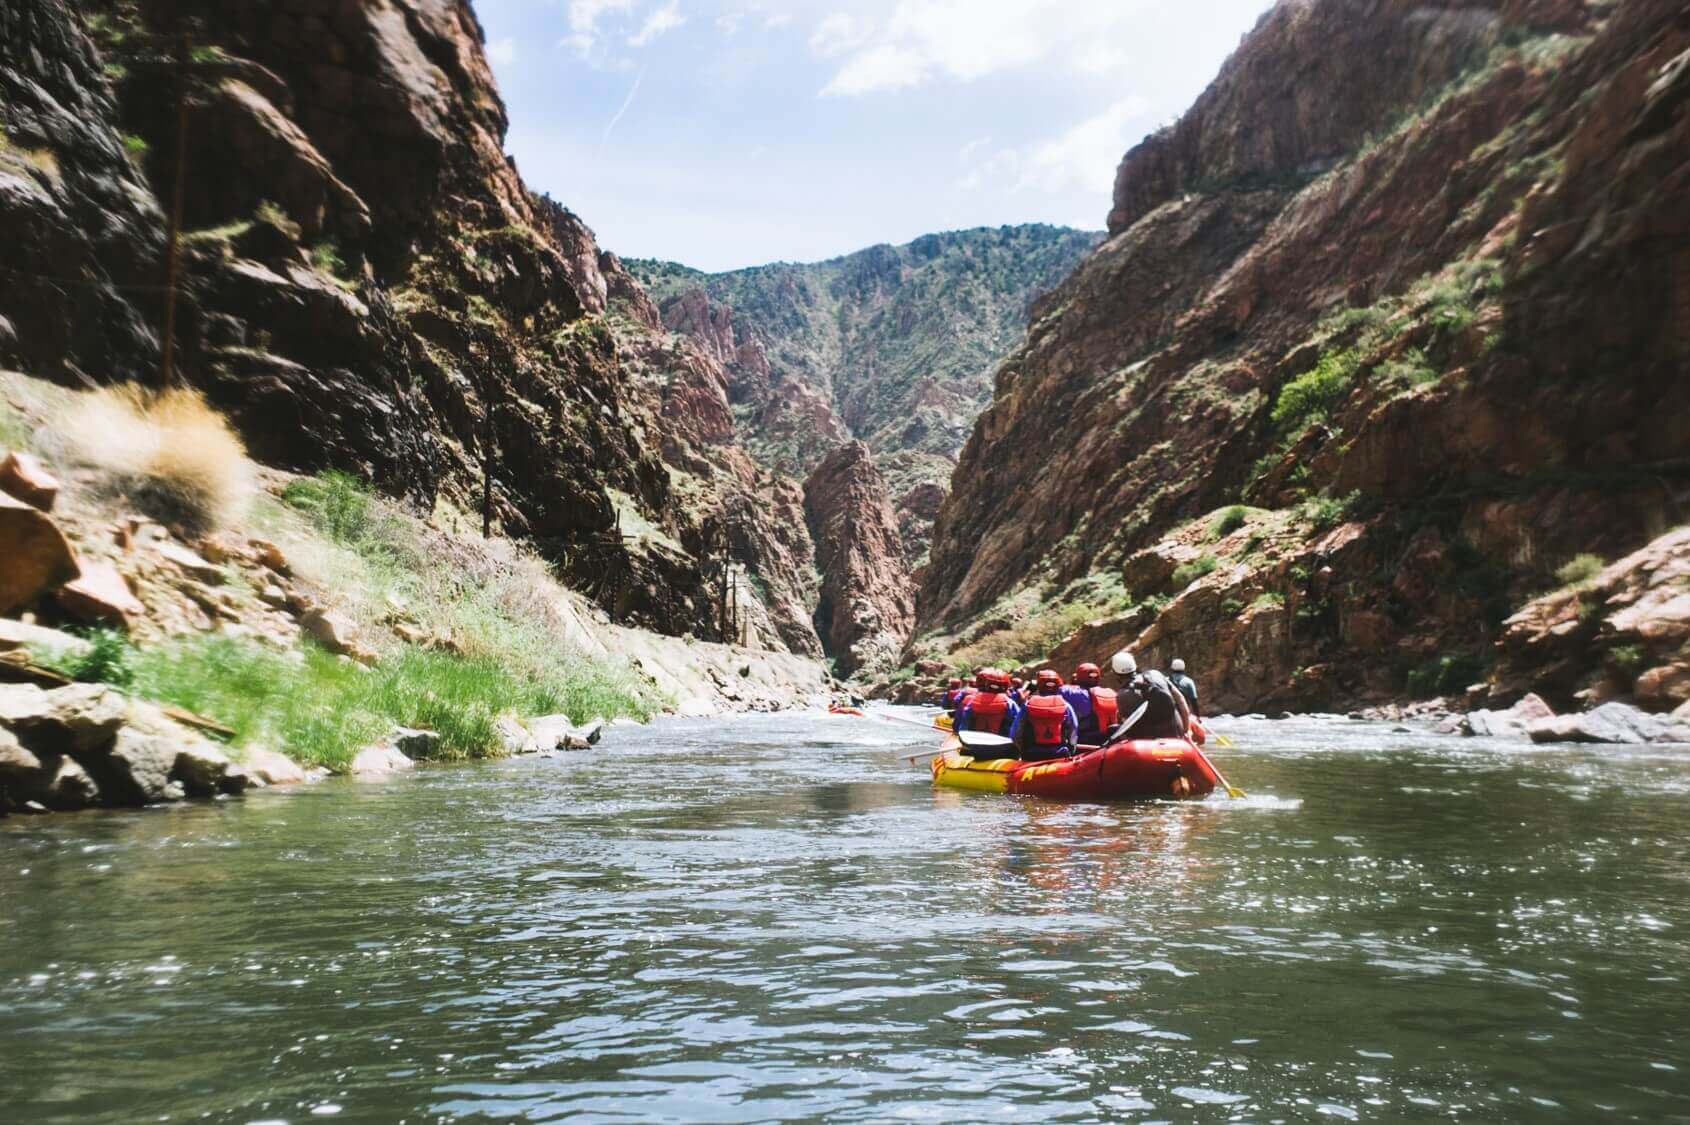 Huge Group For Rafting? No Problem!